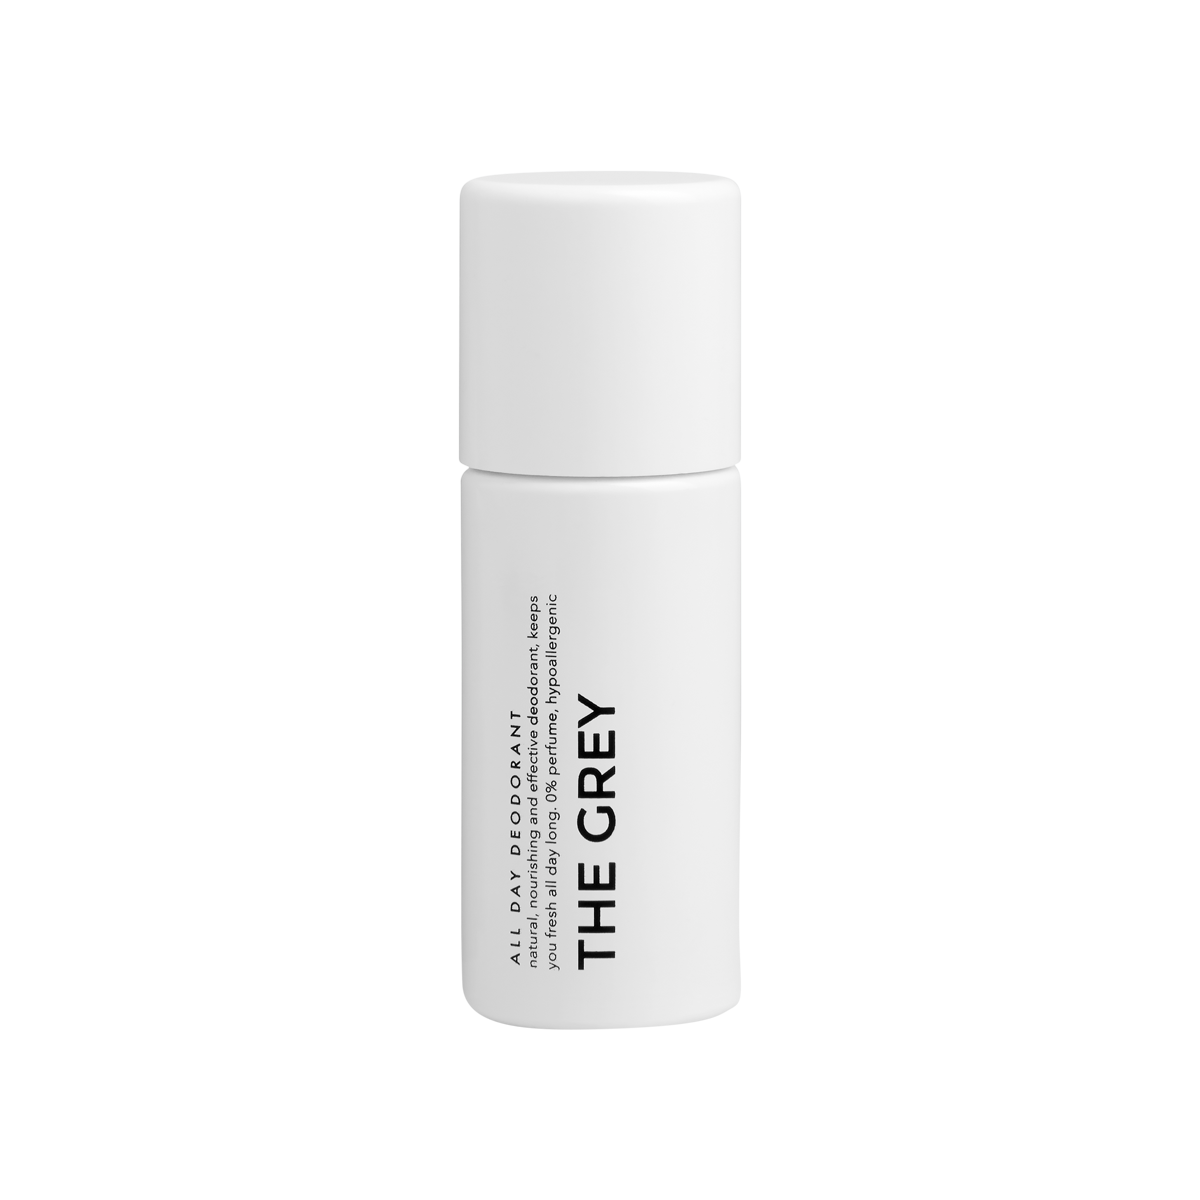 The Grey Skincare - All Day Deodorant